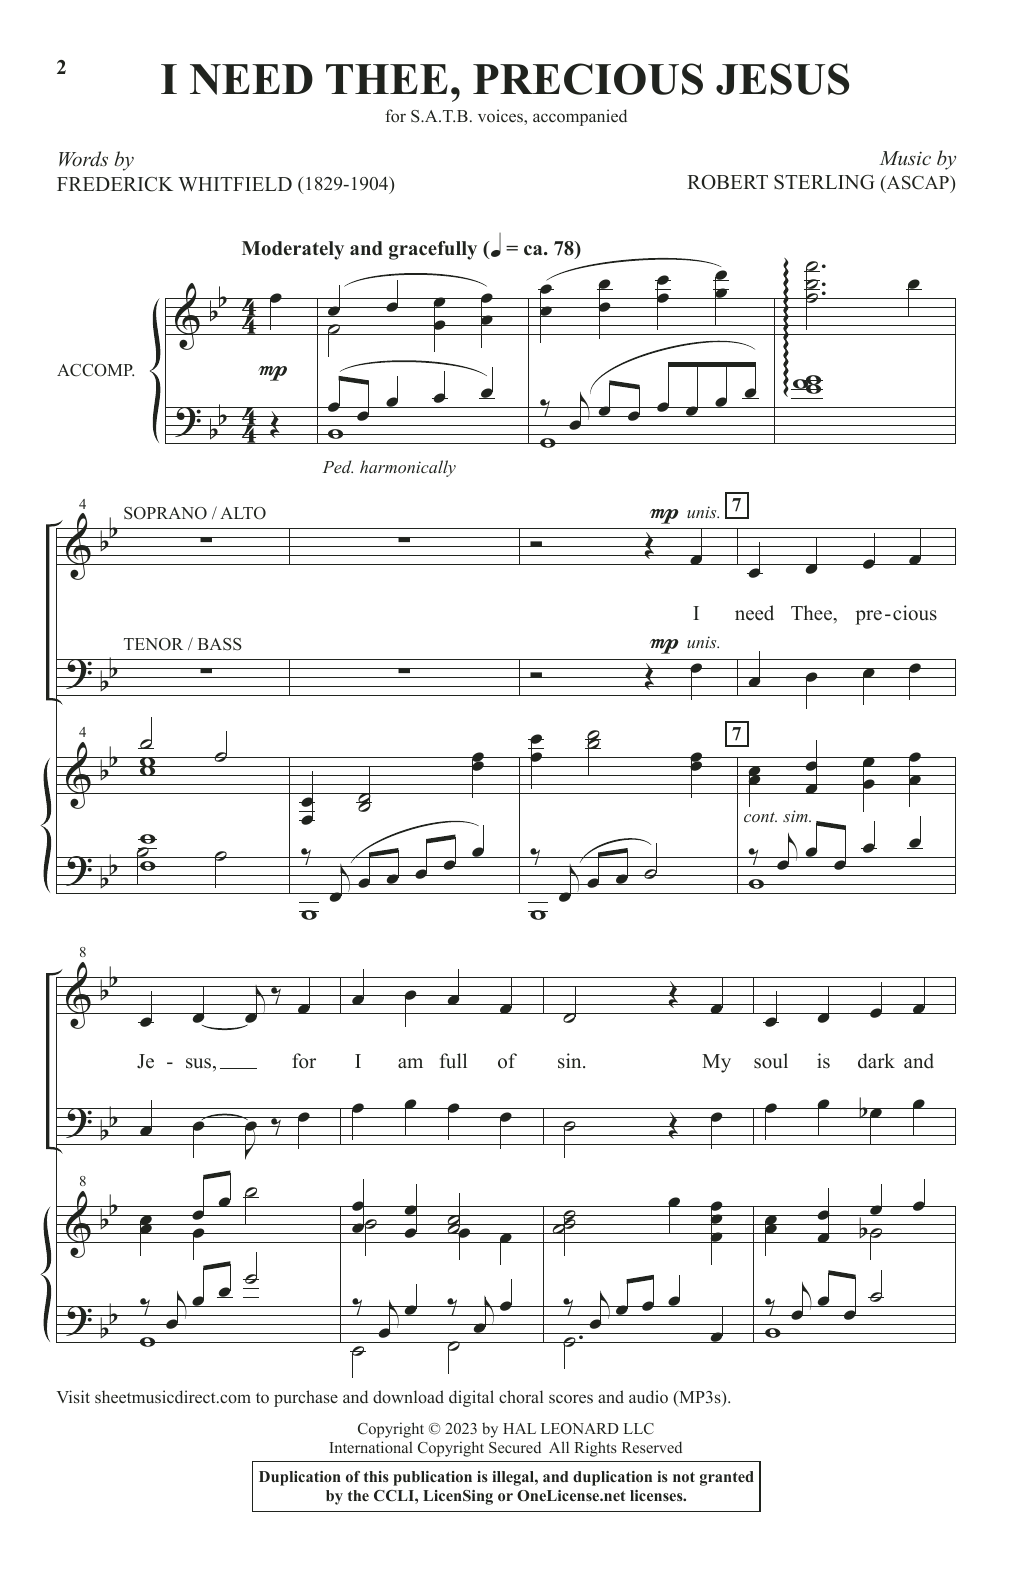 Download Robert Sterling I Need Thee, Precious Jesus Sheet Music